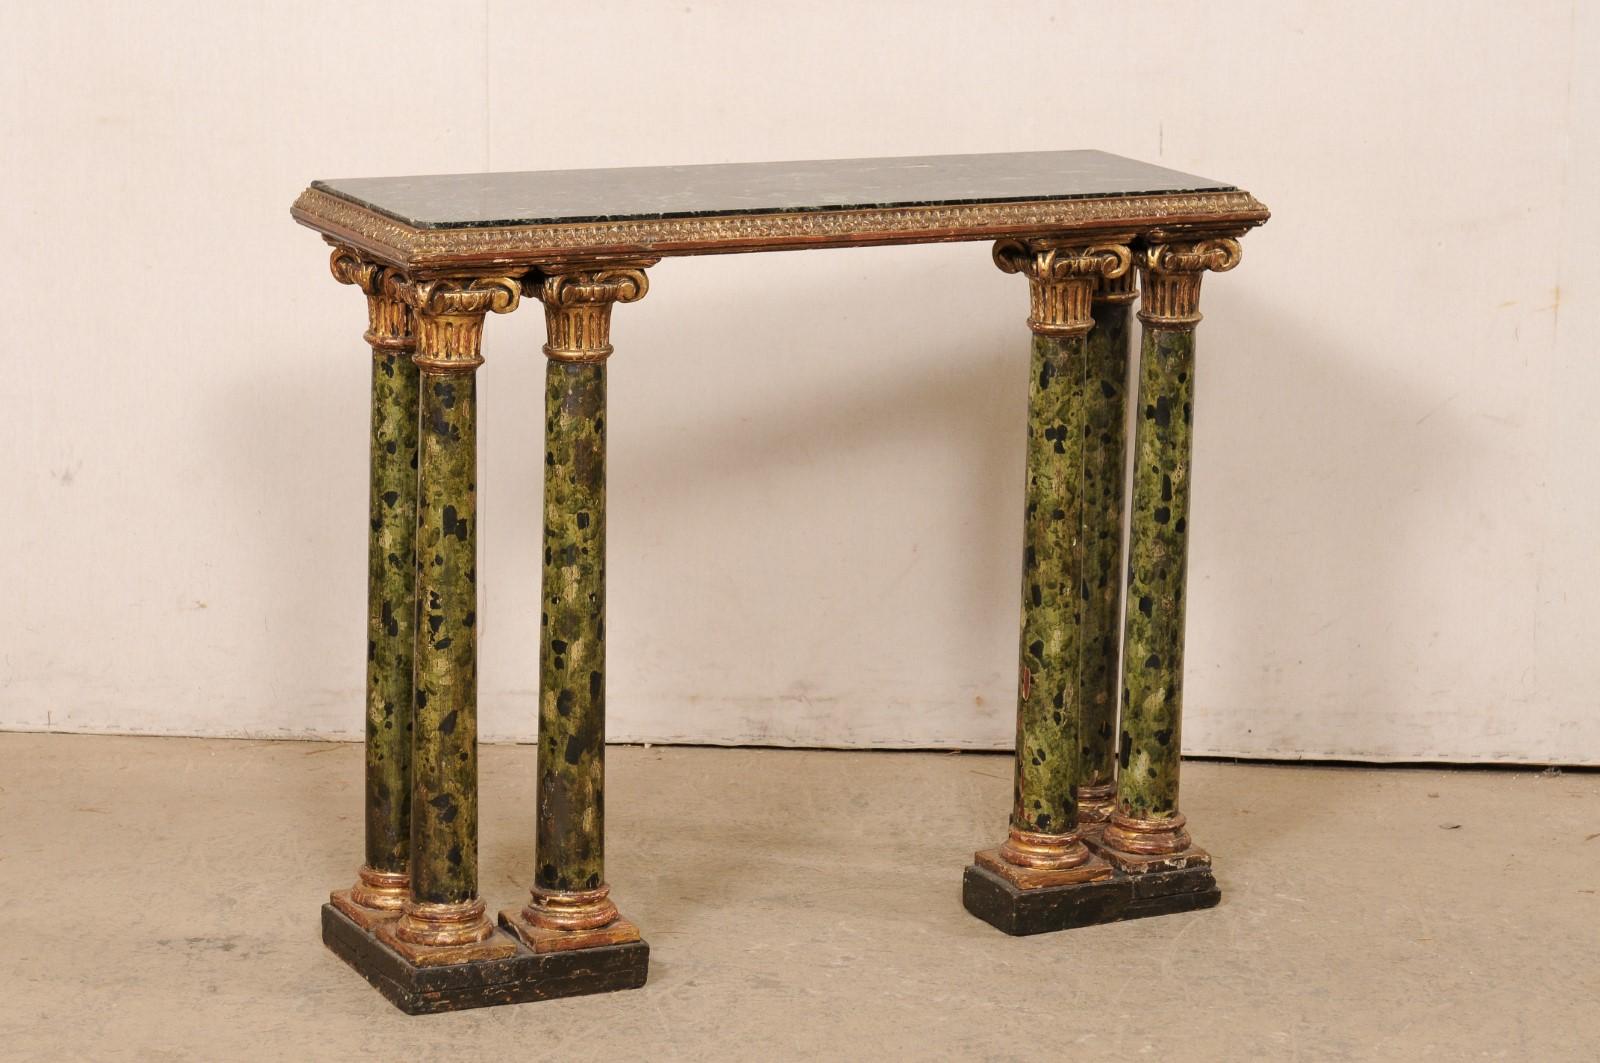 An Italian wall console table with green marble top and column legs from the 19th century. This antique table from Italy features a slender, rectangular-shaped green marble top which is recessed into an elegantly carved lambs tongue frame about its